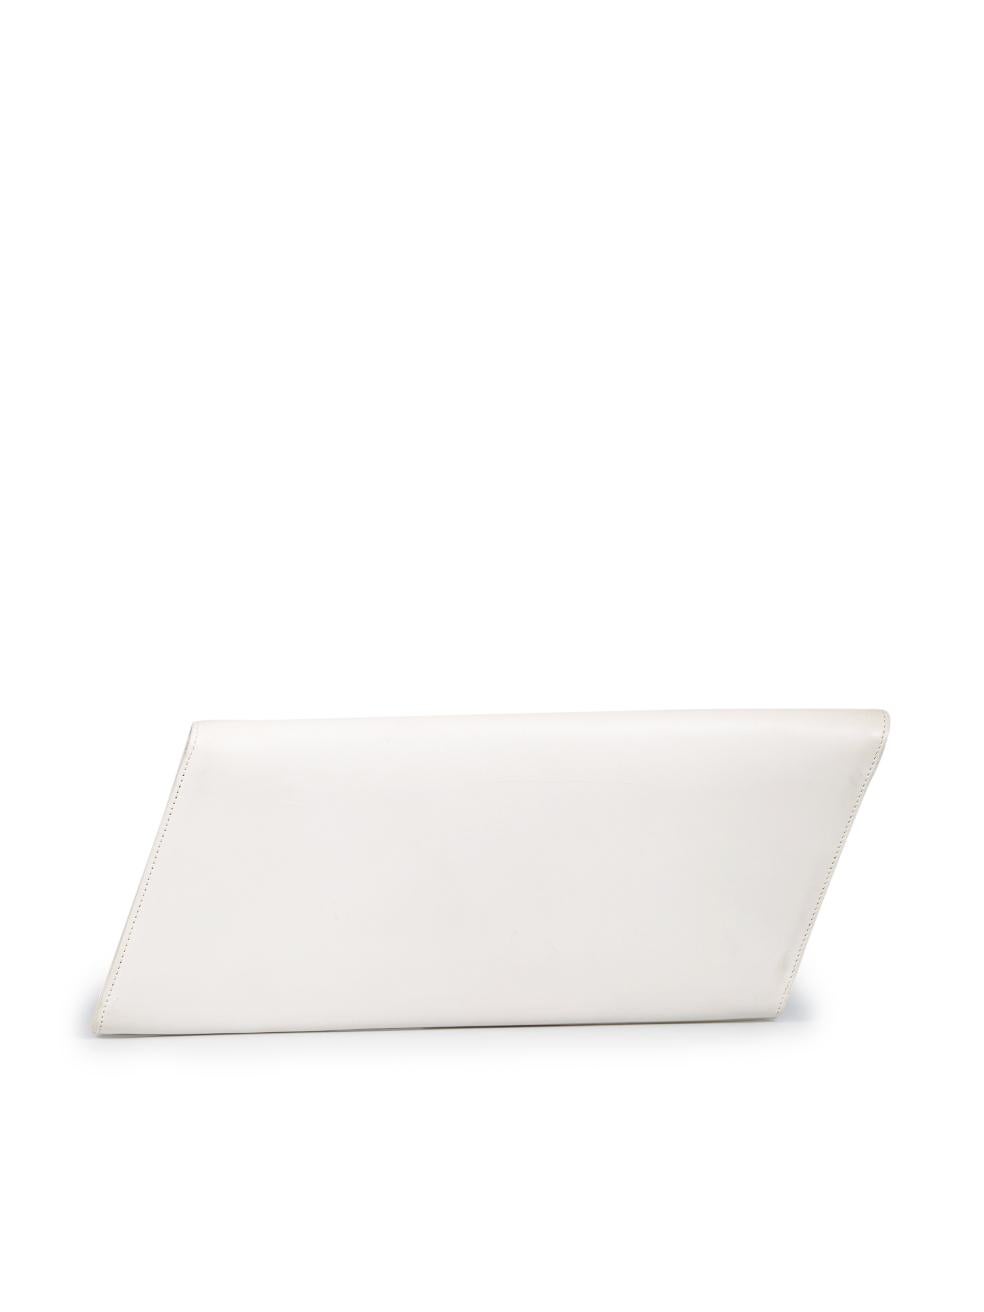 Saint Laurent Ecru Leather Diagonale Clutch In Good Condition For Sale In London, GB